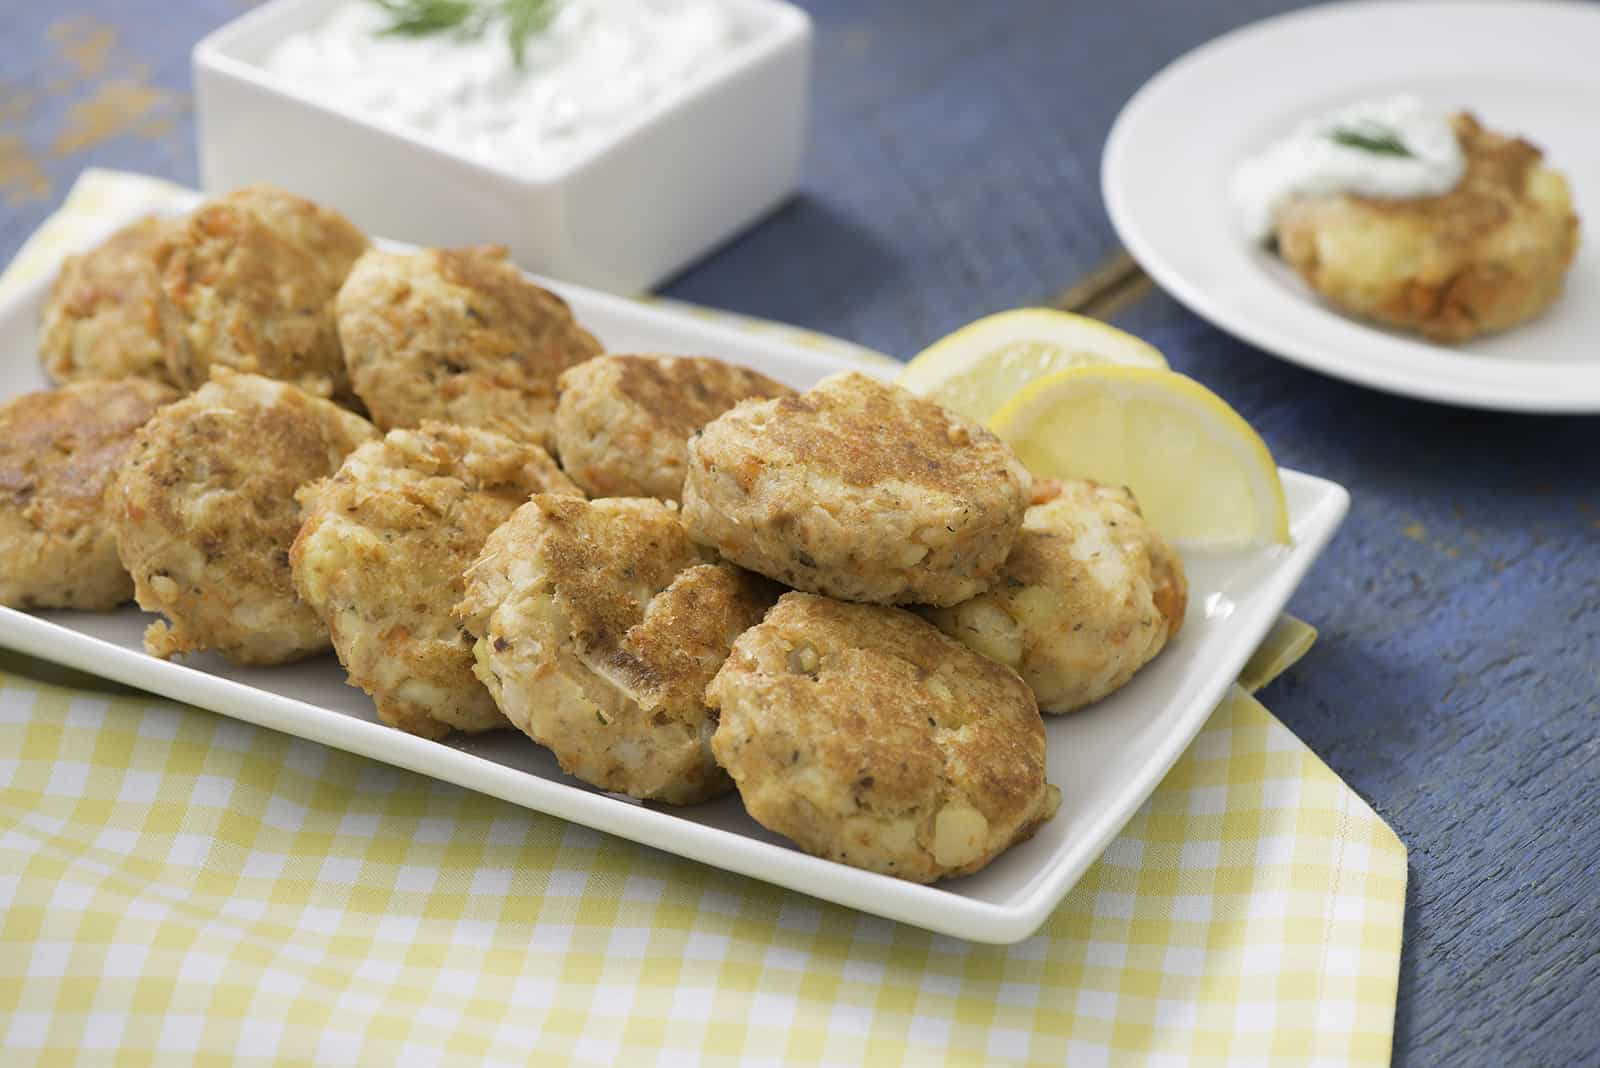 Find these Salmon Cakes and more in this recipe roundup for Seafood Nutrition Month on the Street Smart Nutrition Blog in partnership with Seafood Nutrition Partnership